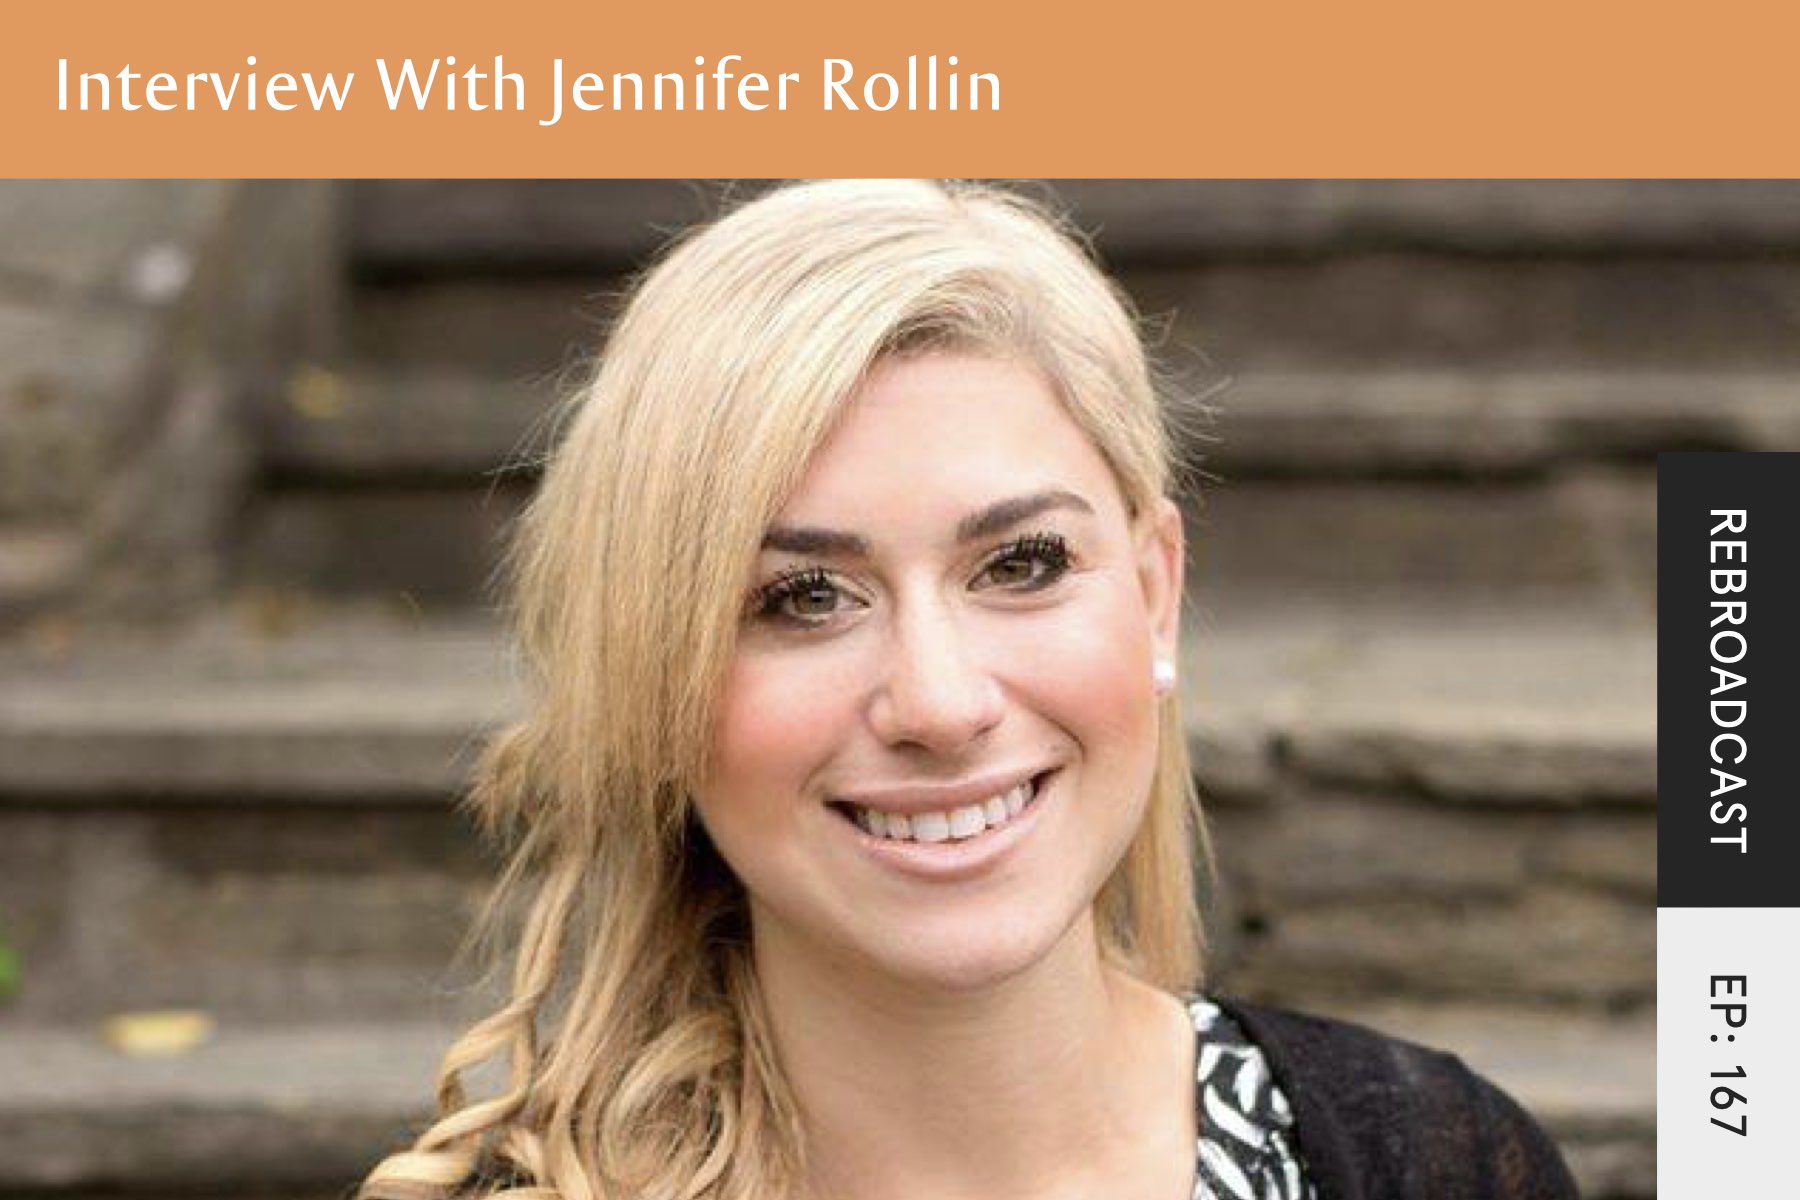 Rebroadcast: Interview With Jennifer Rollin - Seven Health: Eating Disorder Recovery and Anti Diet Nutritionist